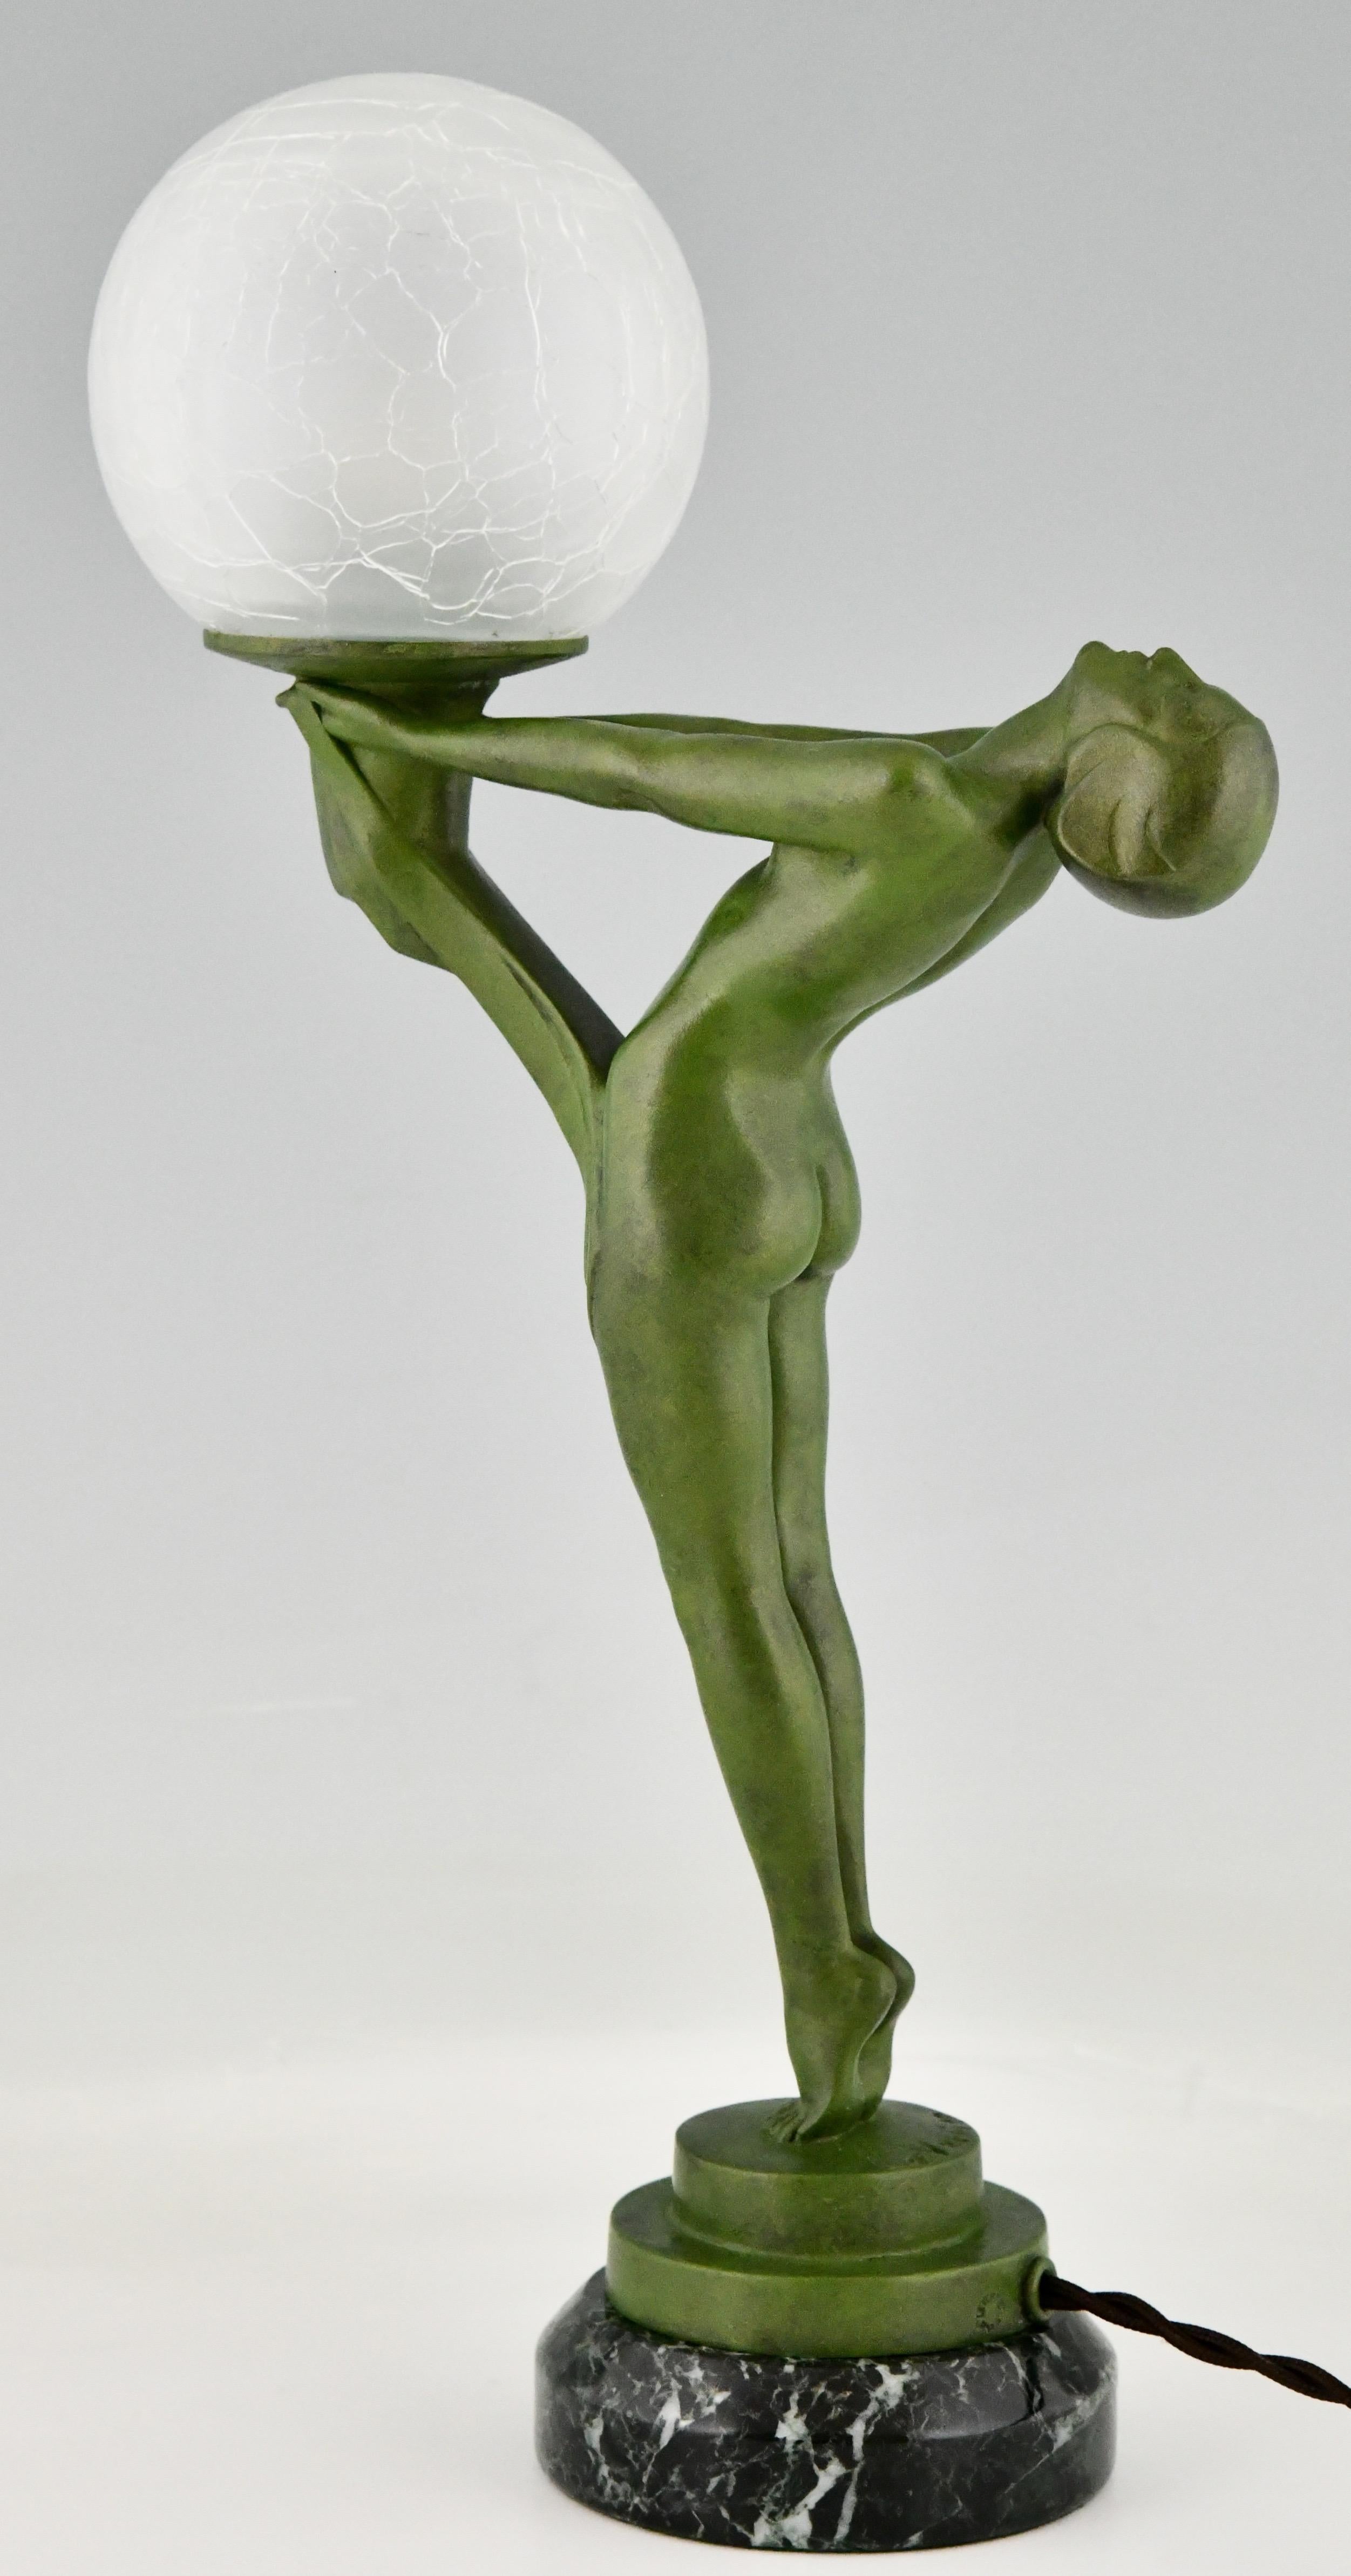 Art Deco Lamp Standing Nude with Ball Clarté by Max Le Verrier Original 1930 For Sale 1